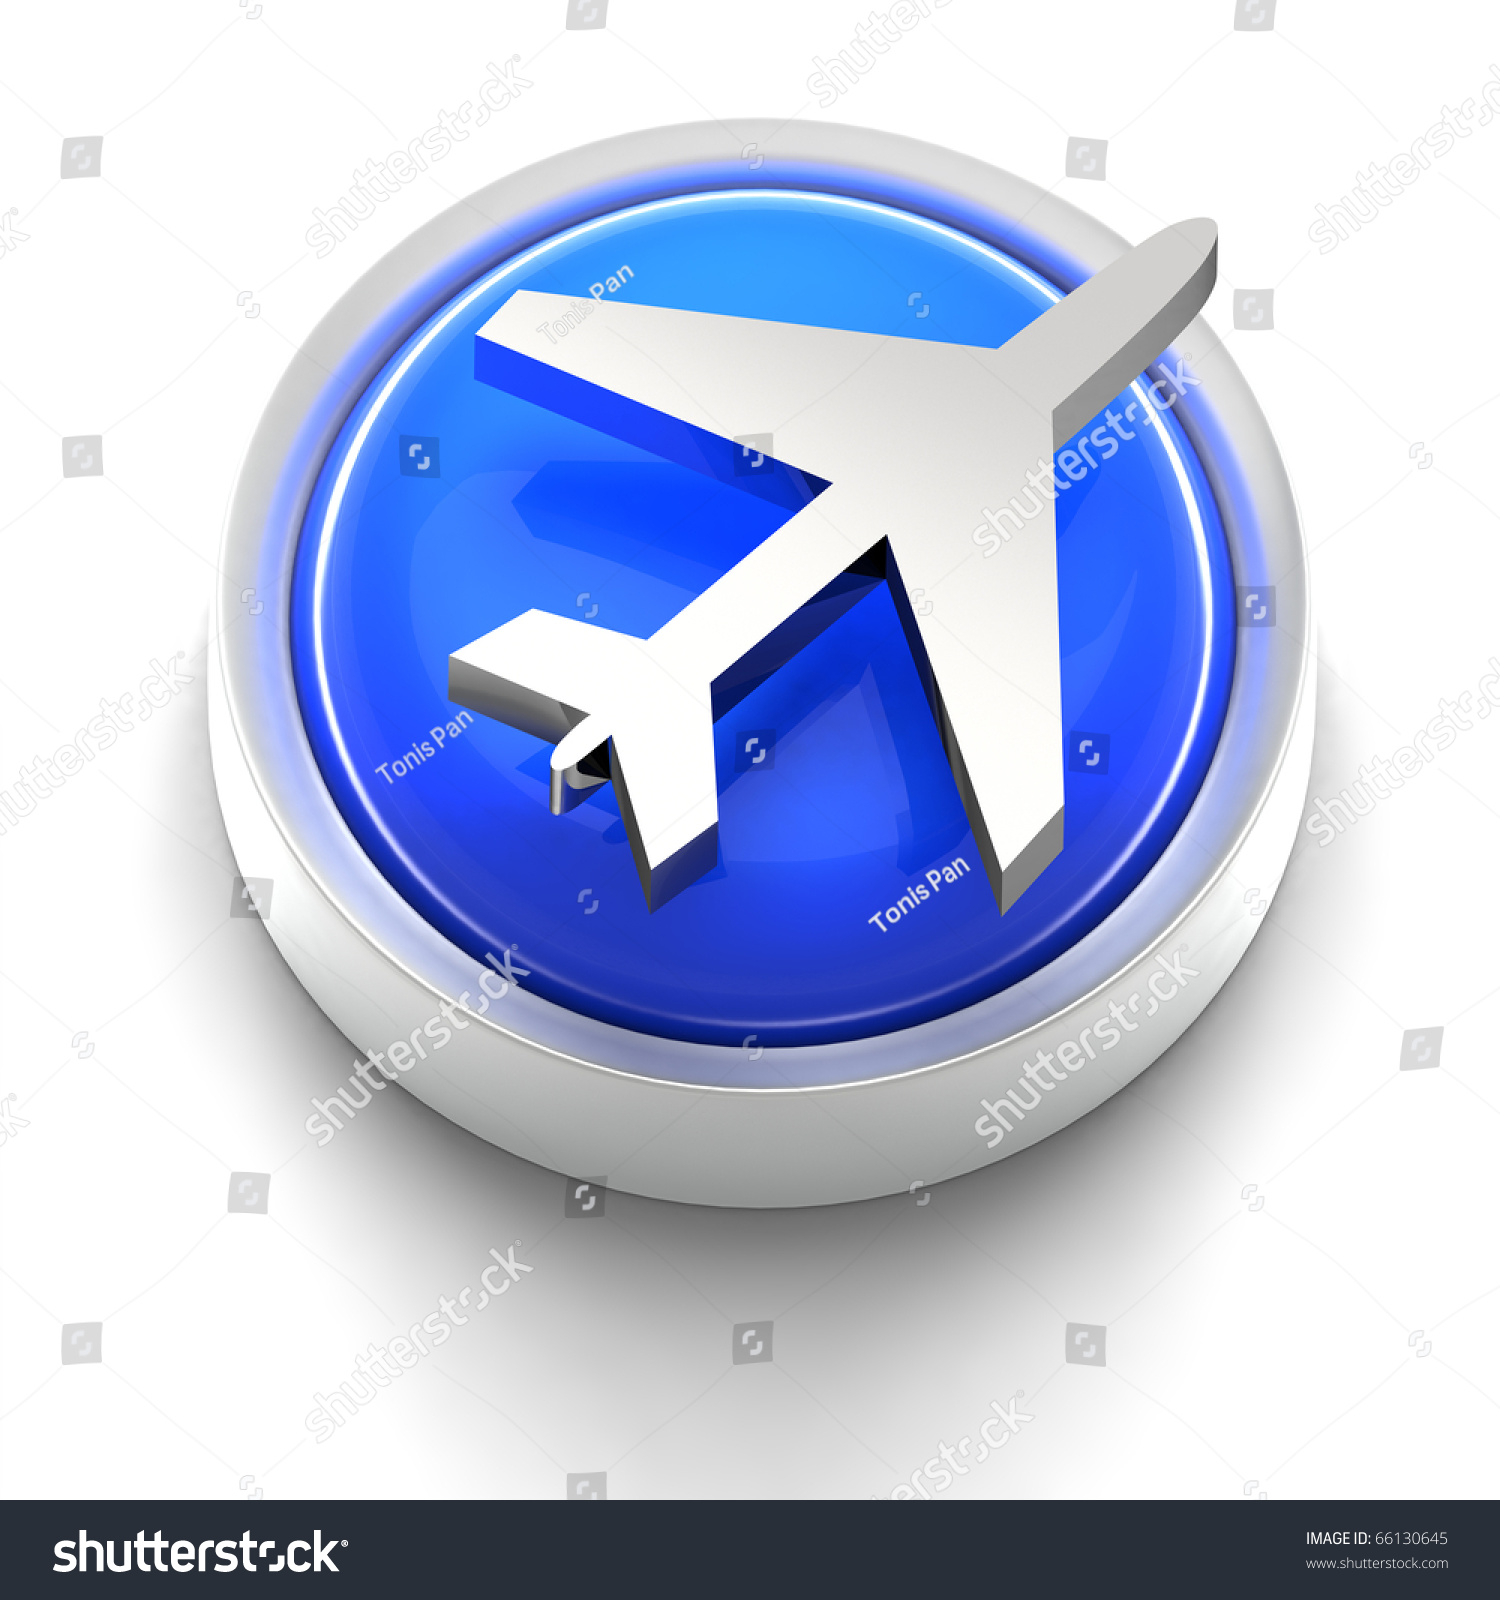 3d Rendered Illustration Of Button Icon With Airplane Symbol - 66130645 ...